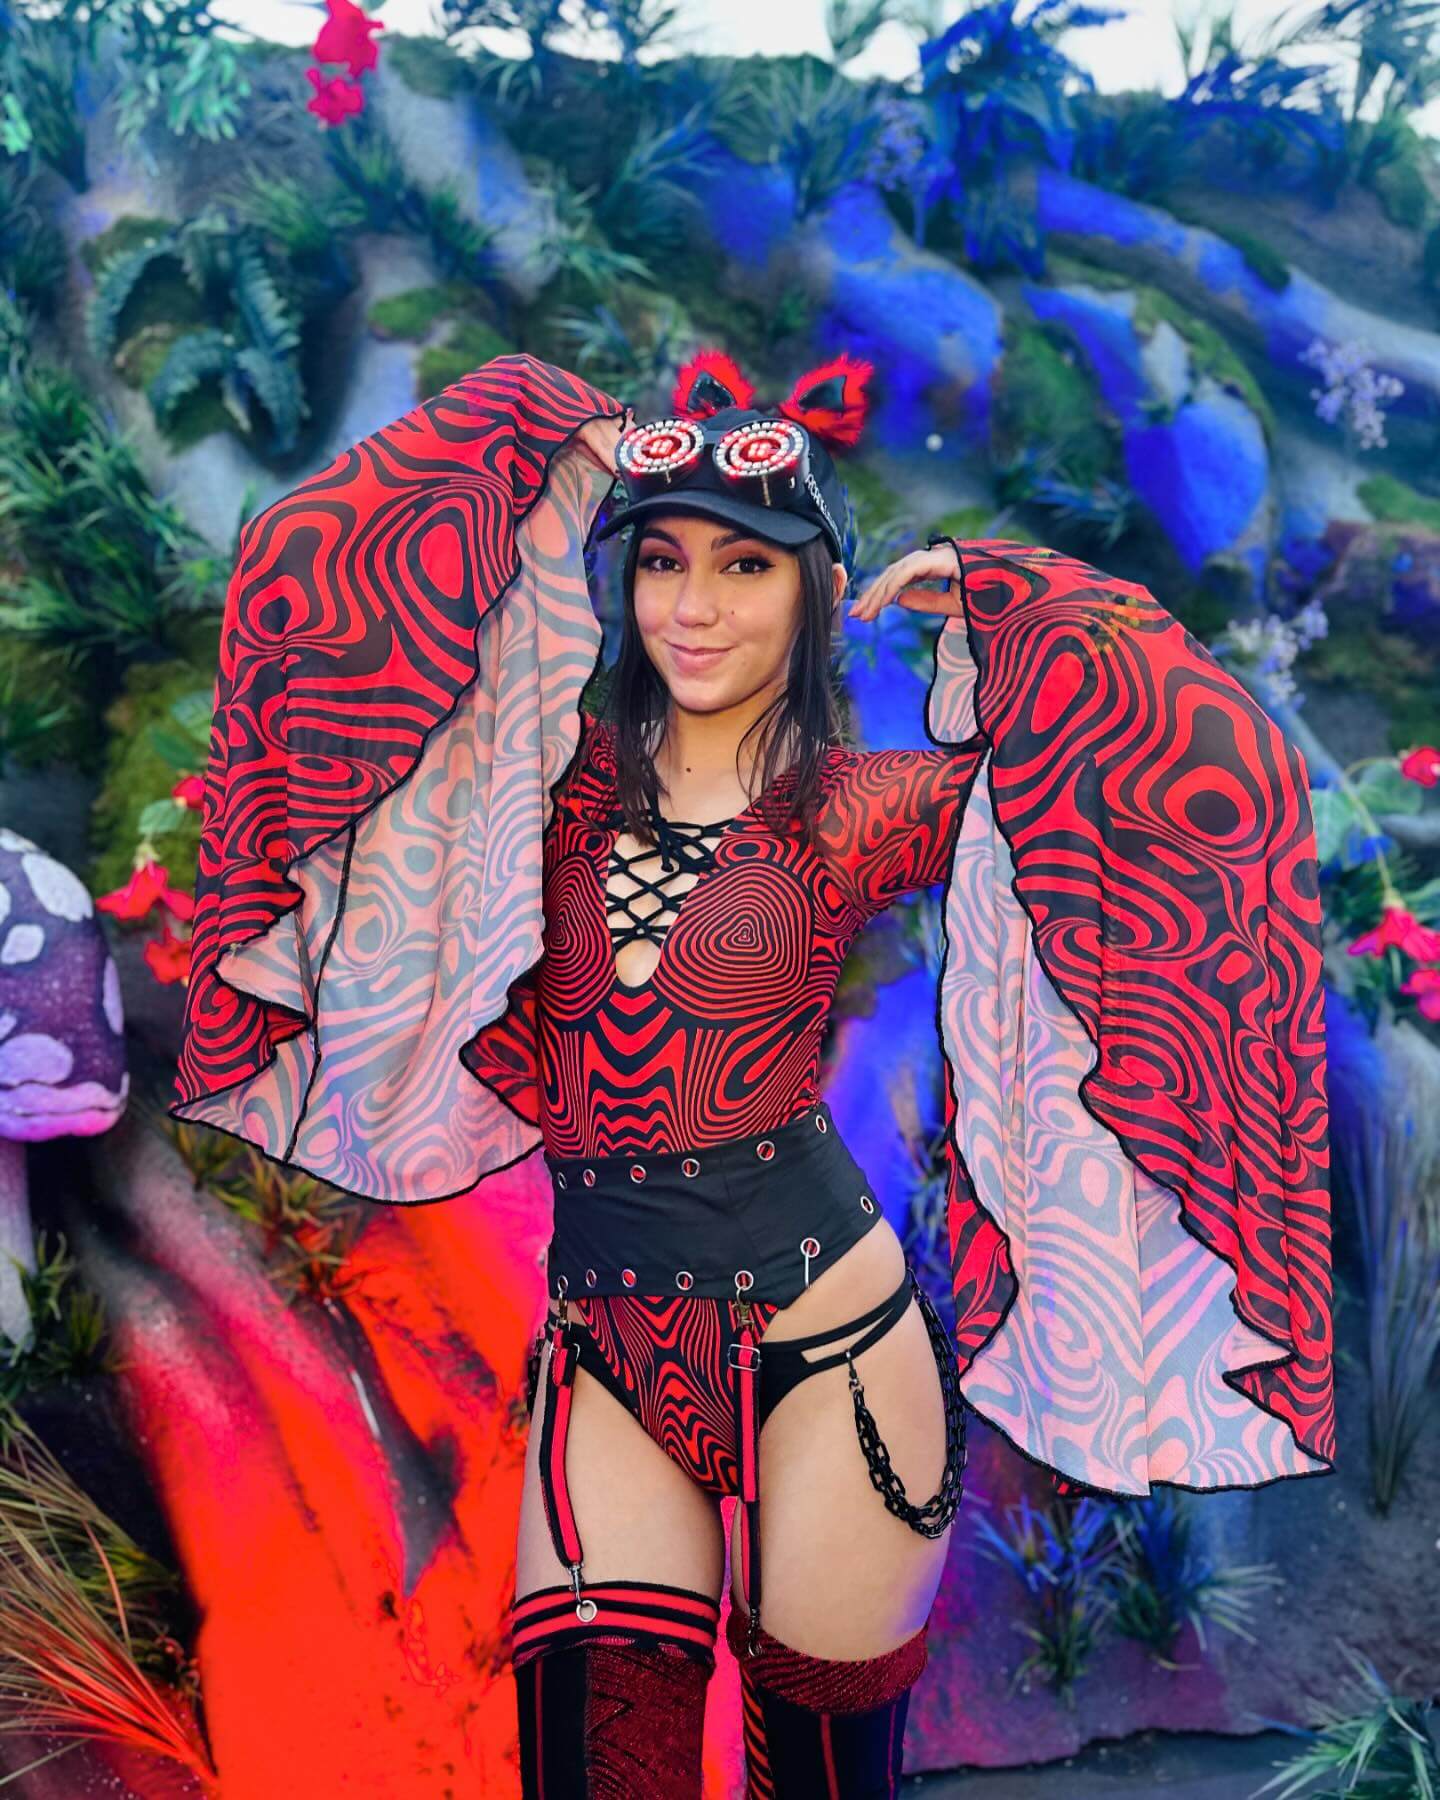 Rave fashionista in red and black patterned attire with LED goggles and kitty ears, posing in a whimsical festival environment